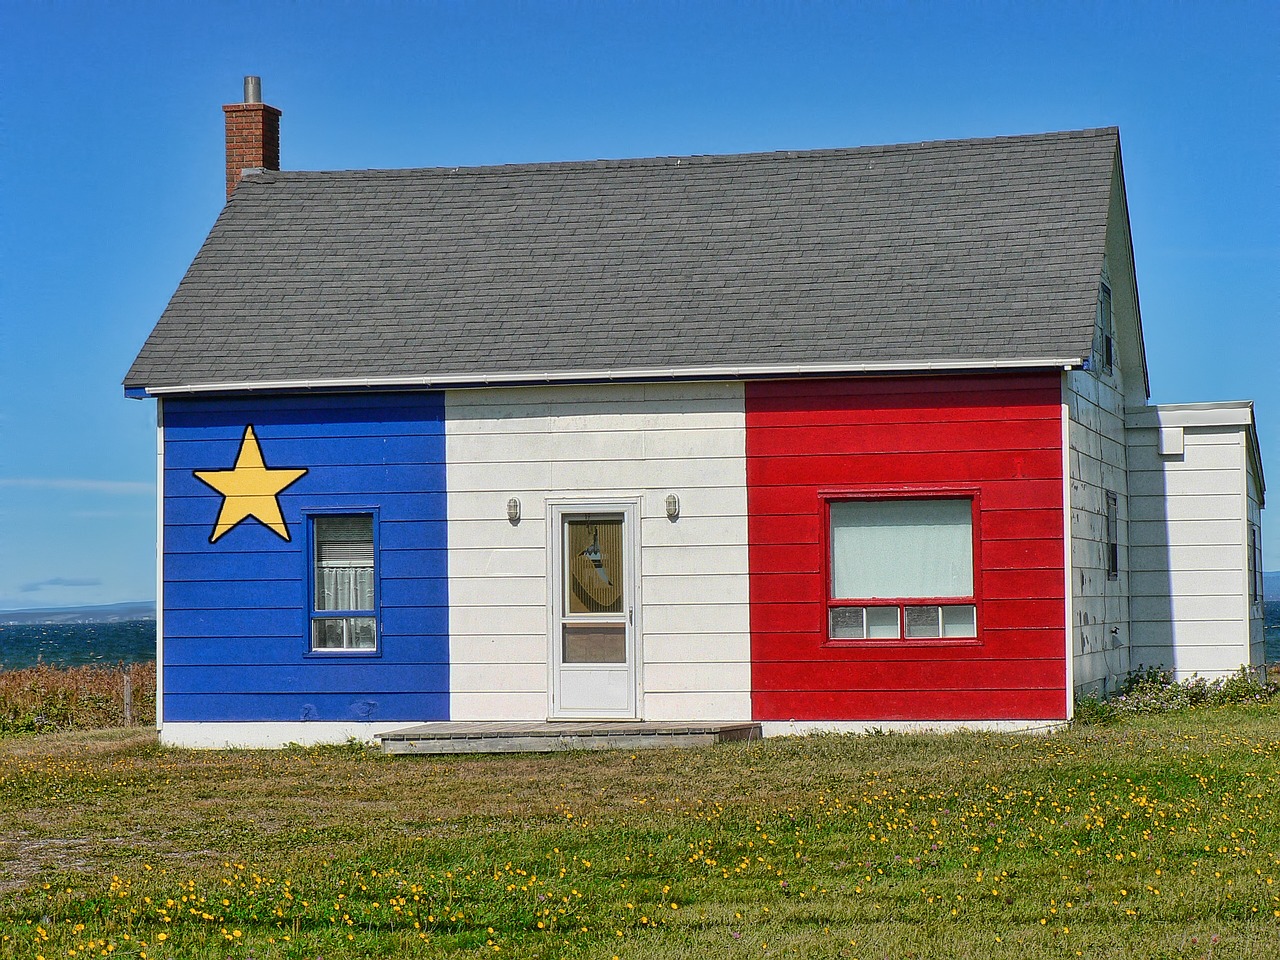 A picture of a house painted blue, white and red, the colors of the Acadian, to introduce that my father is Acadian and speaks French